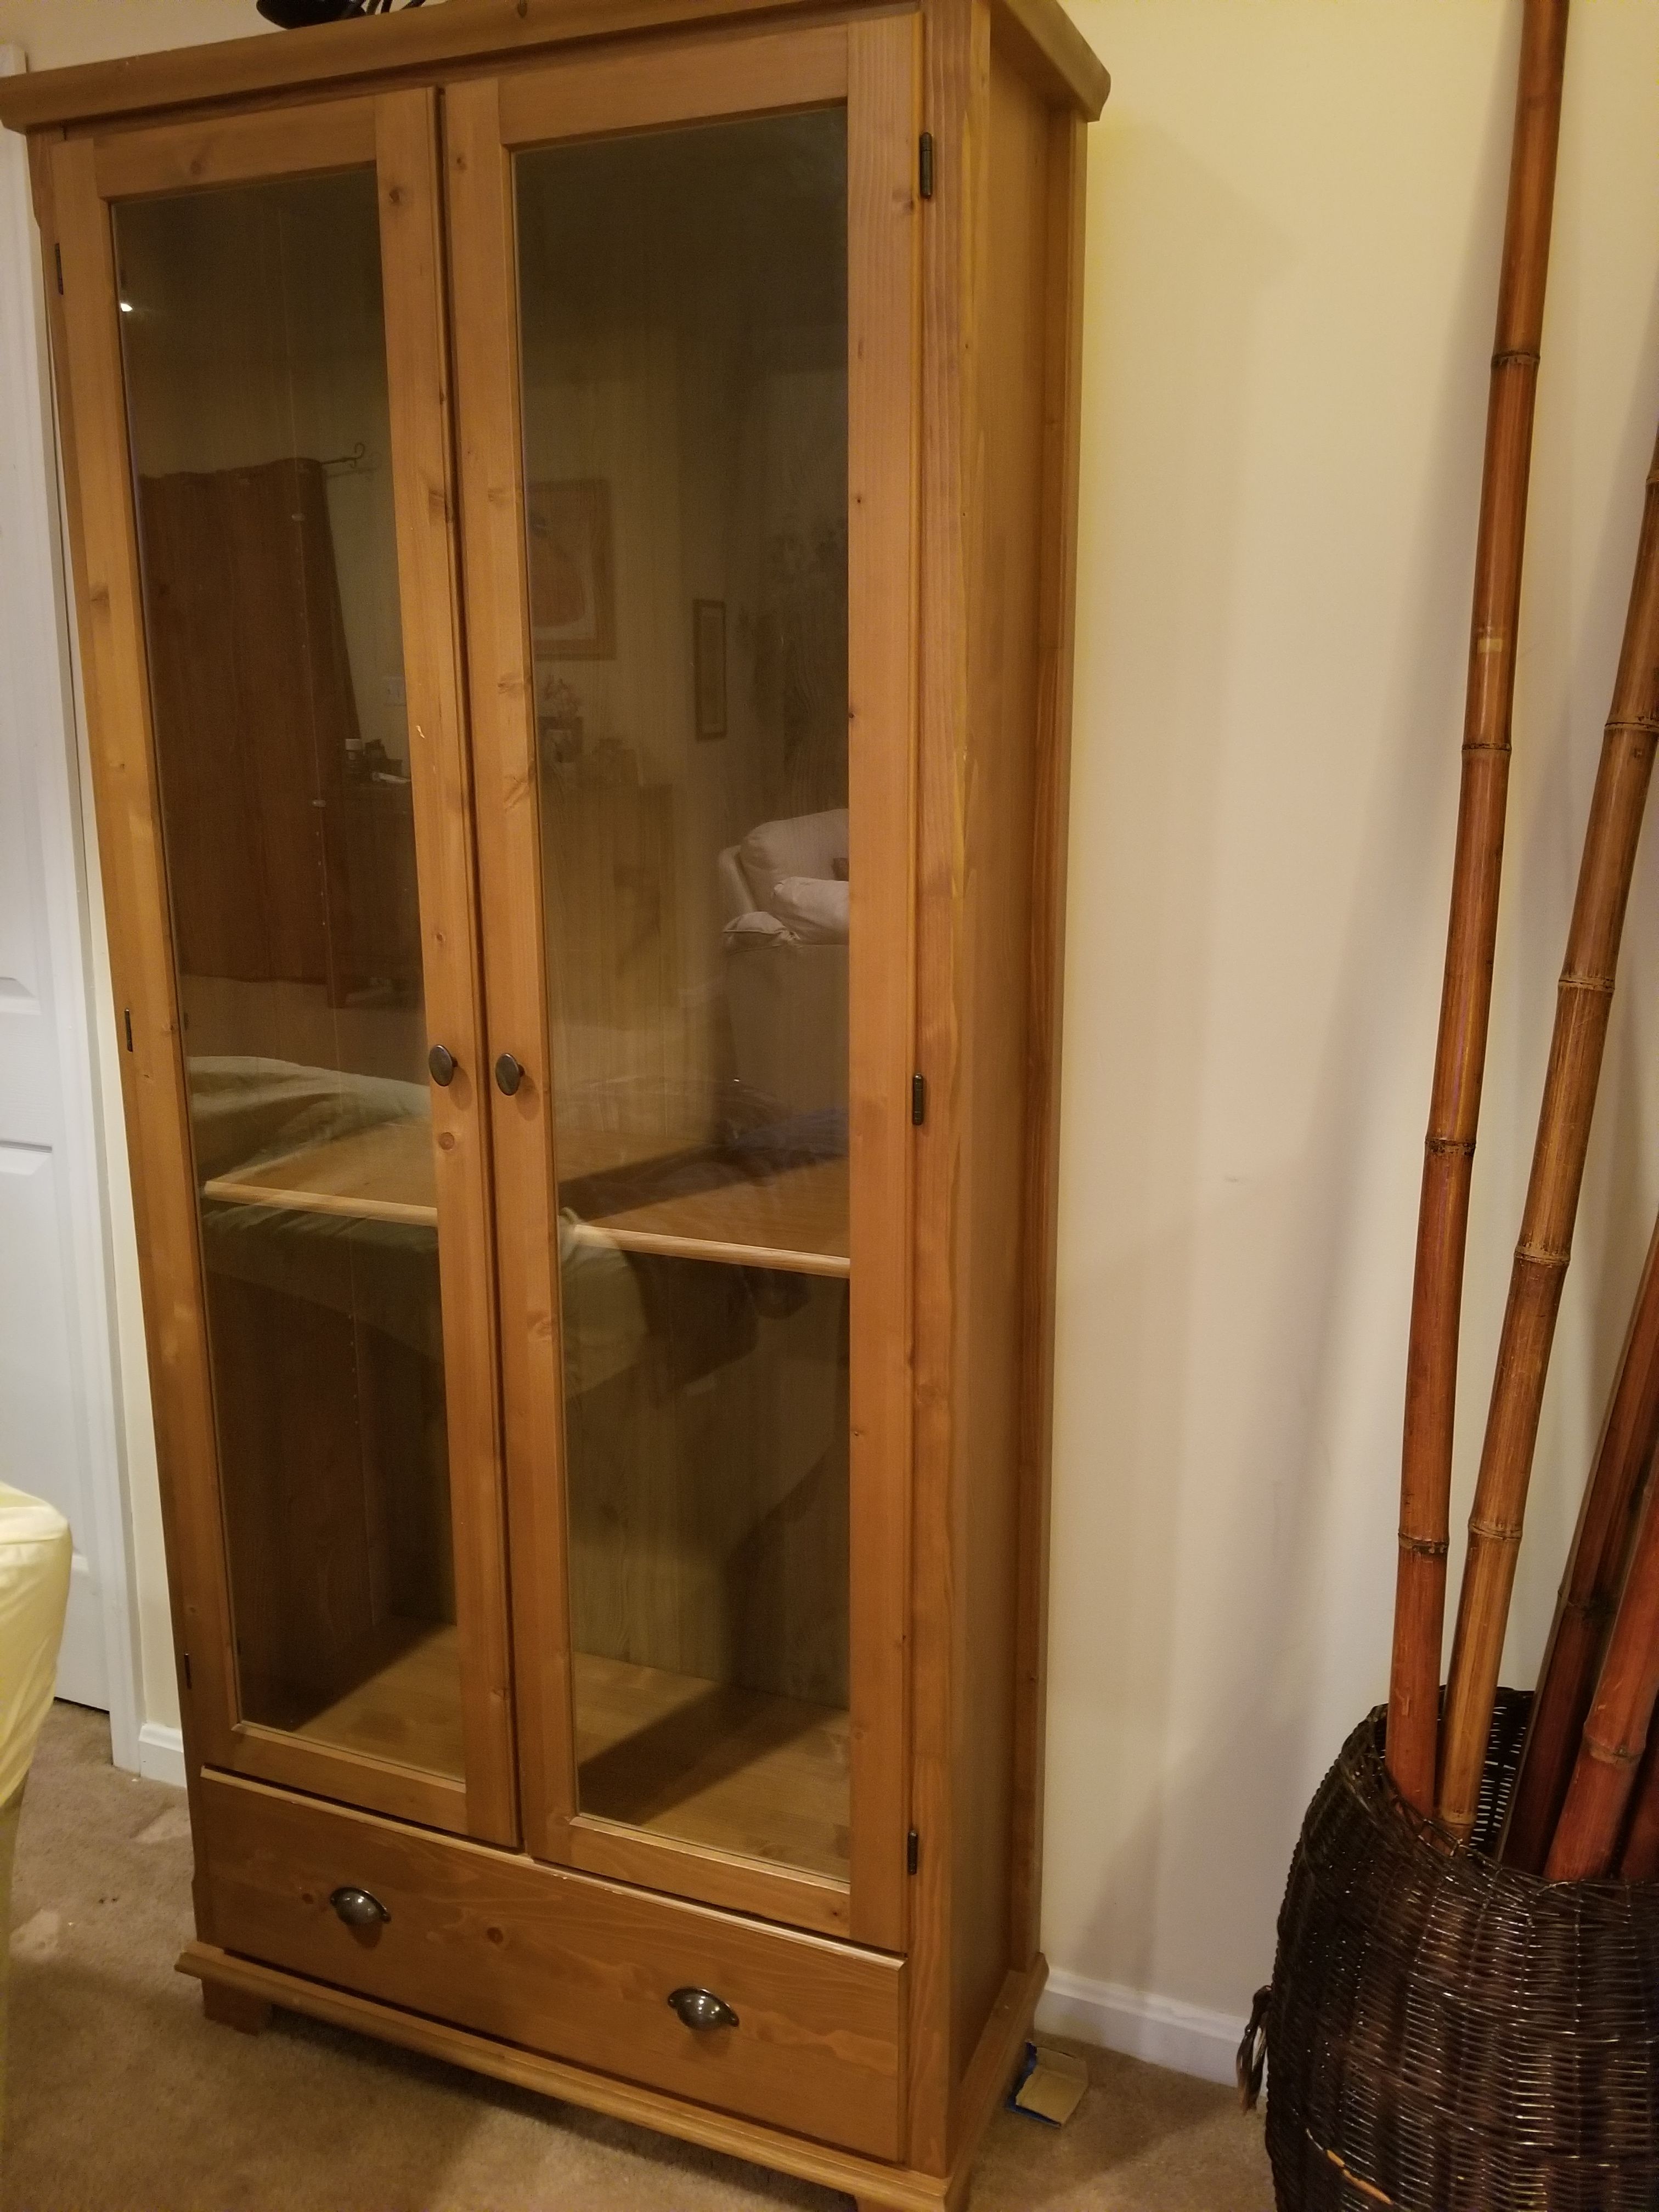 Wood cabinet 76" high with bottom drawer